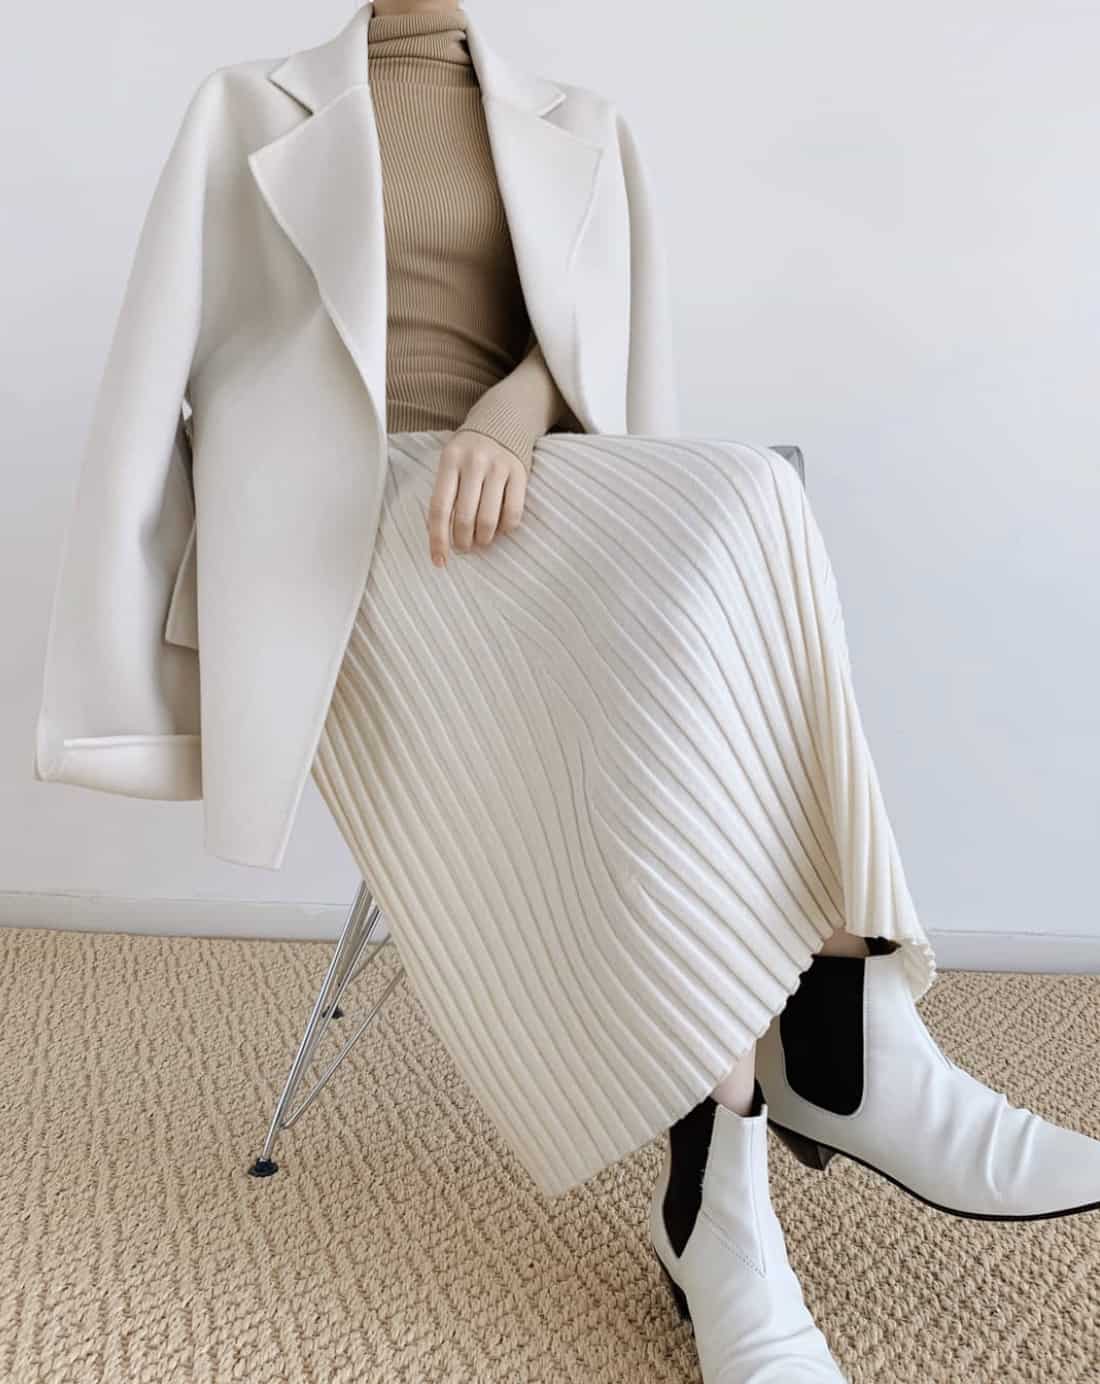 A woman wearing a beige turtleneck sweater with a short white wool coat, a white knit midi skirt, and white and black heeled ankle boots